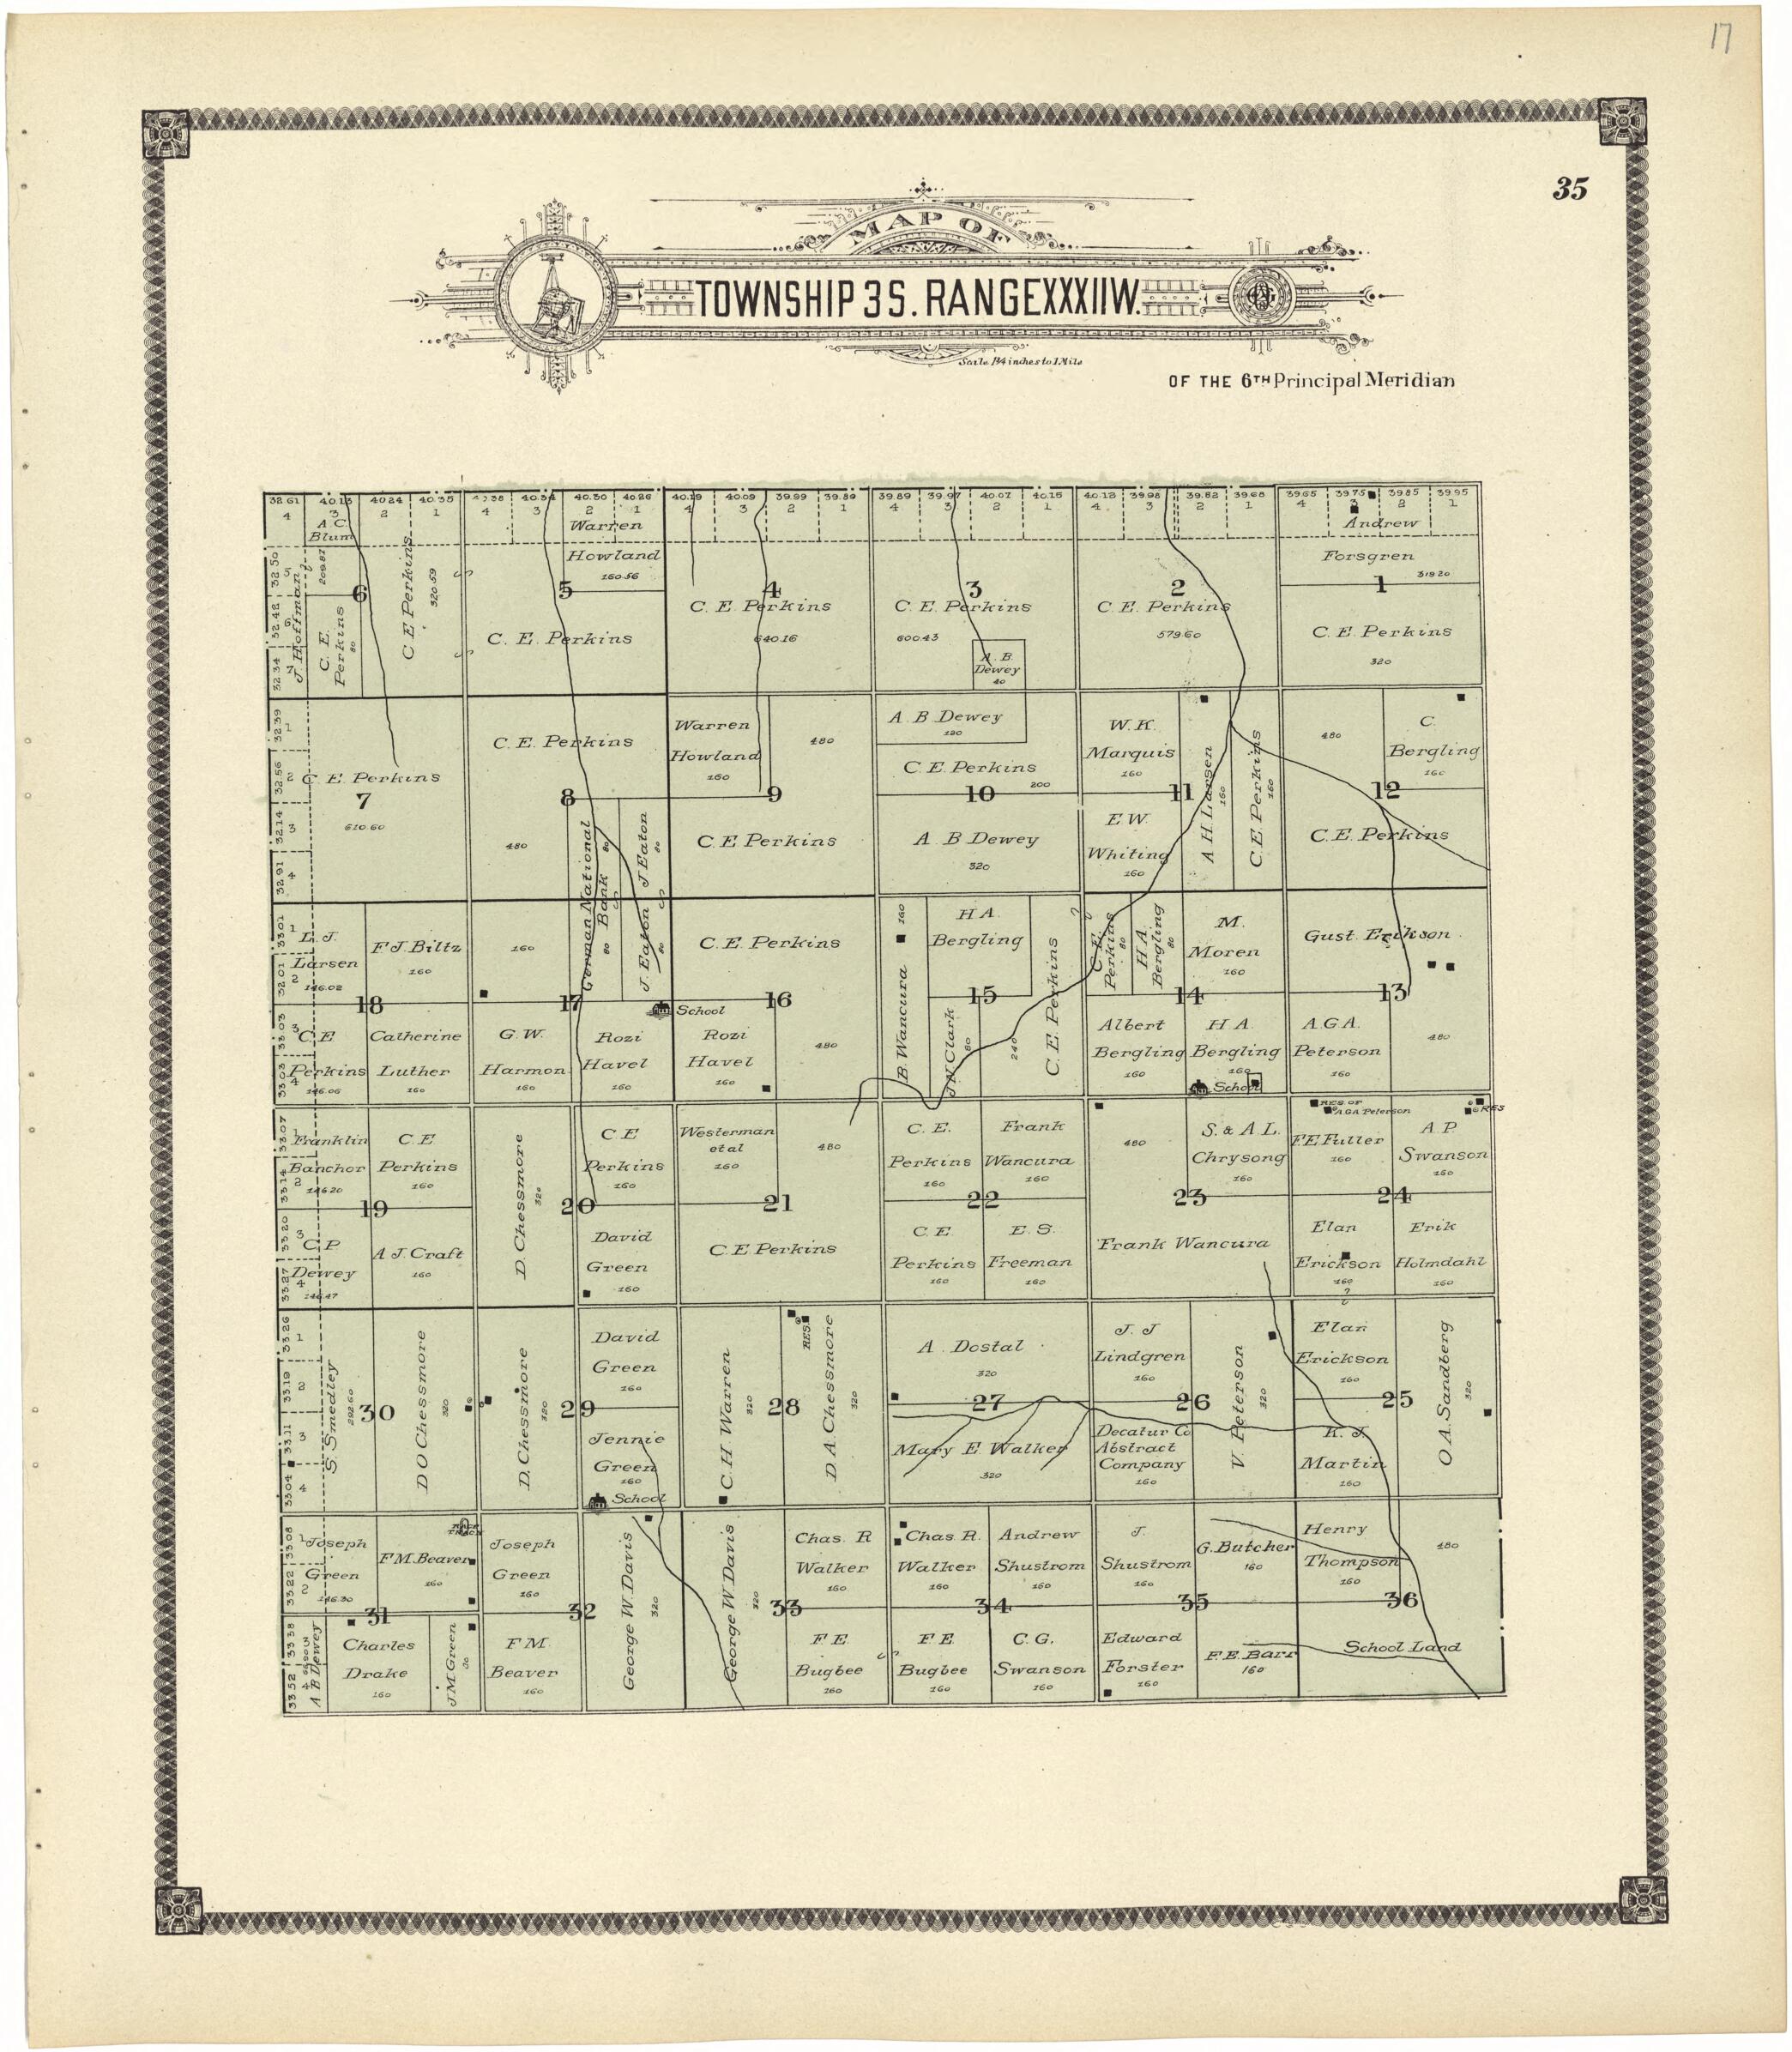 This old map of Map of Township 3 S. Range XXXII W. from Standard Atlas of Rawlins County, Kansas from 1906 was created by  Geo. A. Ogle &amp; Co in 1906